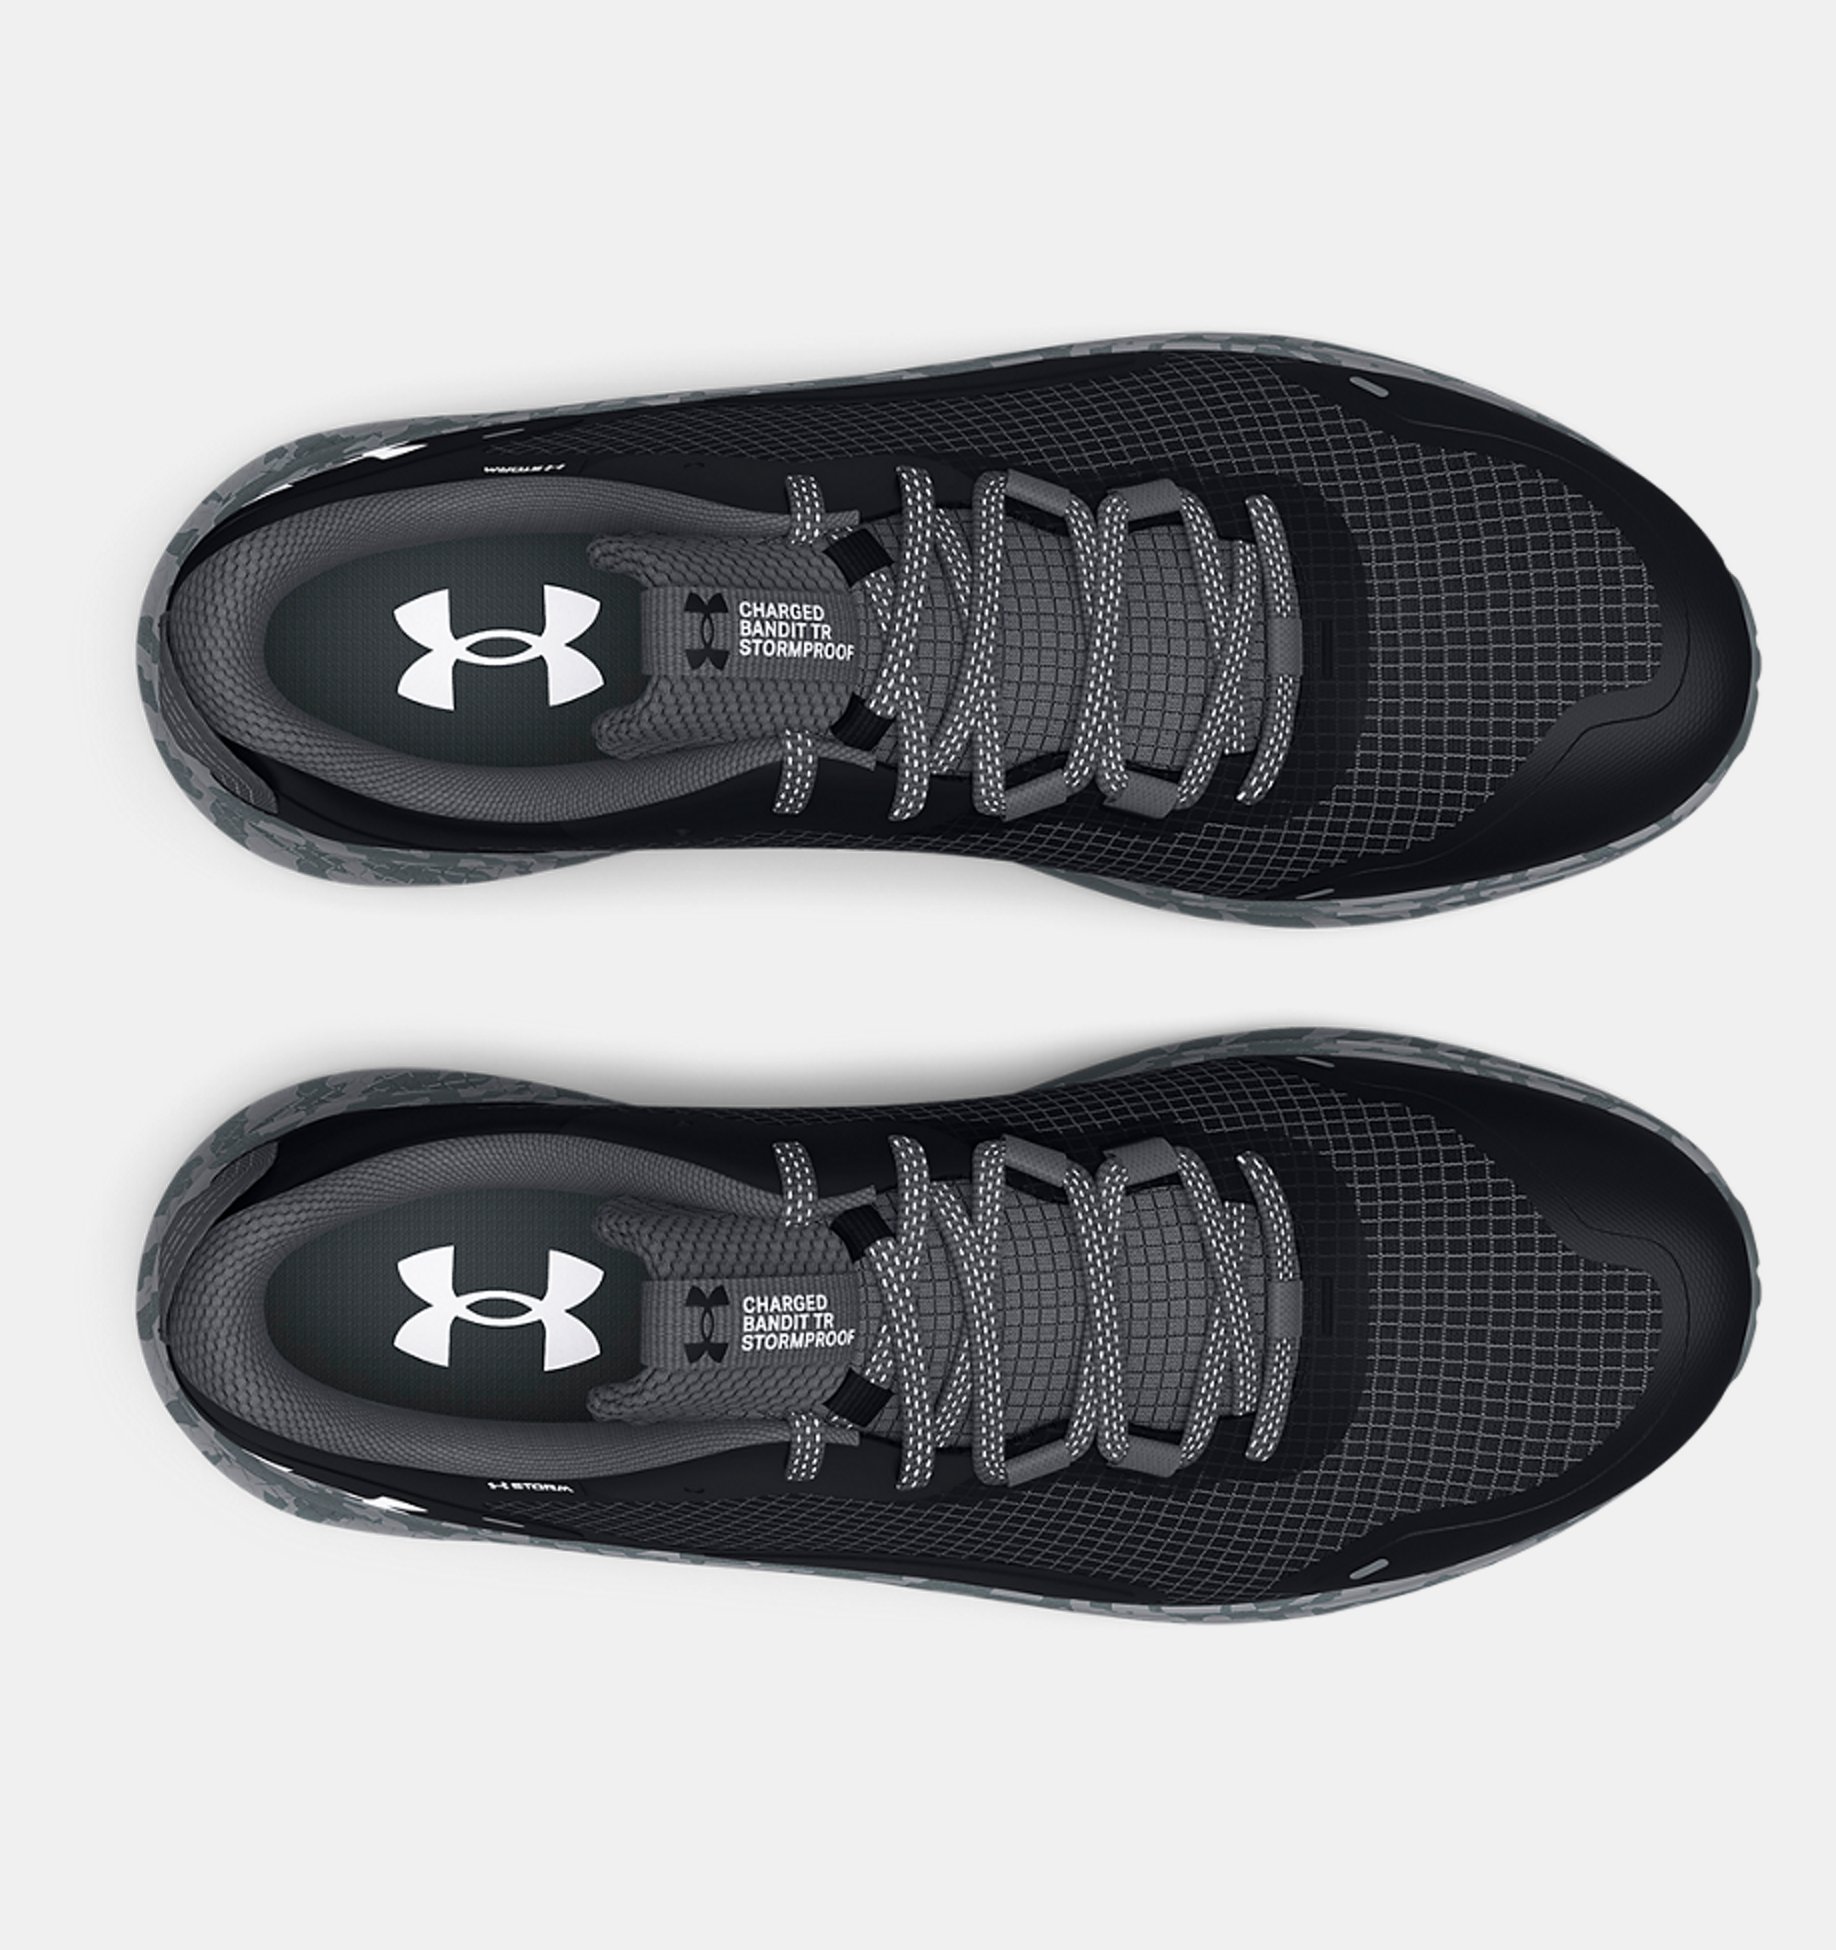 Men's Under Armour UA Charged Bandit 2 Running Shoes Trainers UK Sizes 6-14 